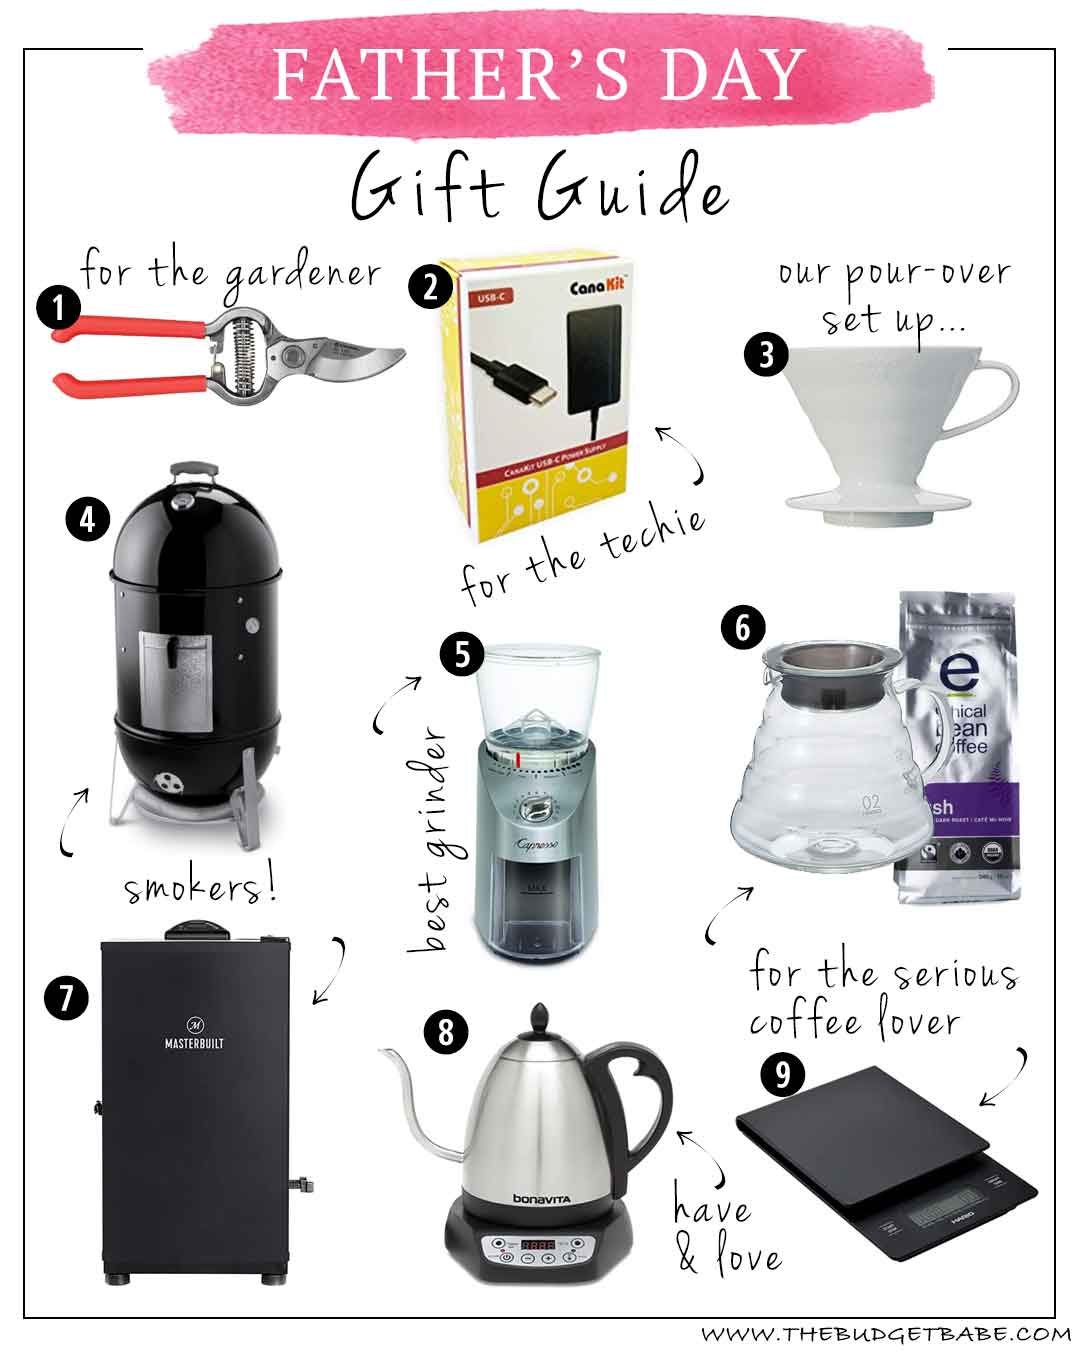 Father's Day gift guide 2020 unique gifts he'll love| The Budget Babe blog | Amazon, Walmart, Target and more